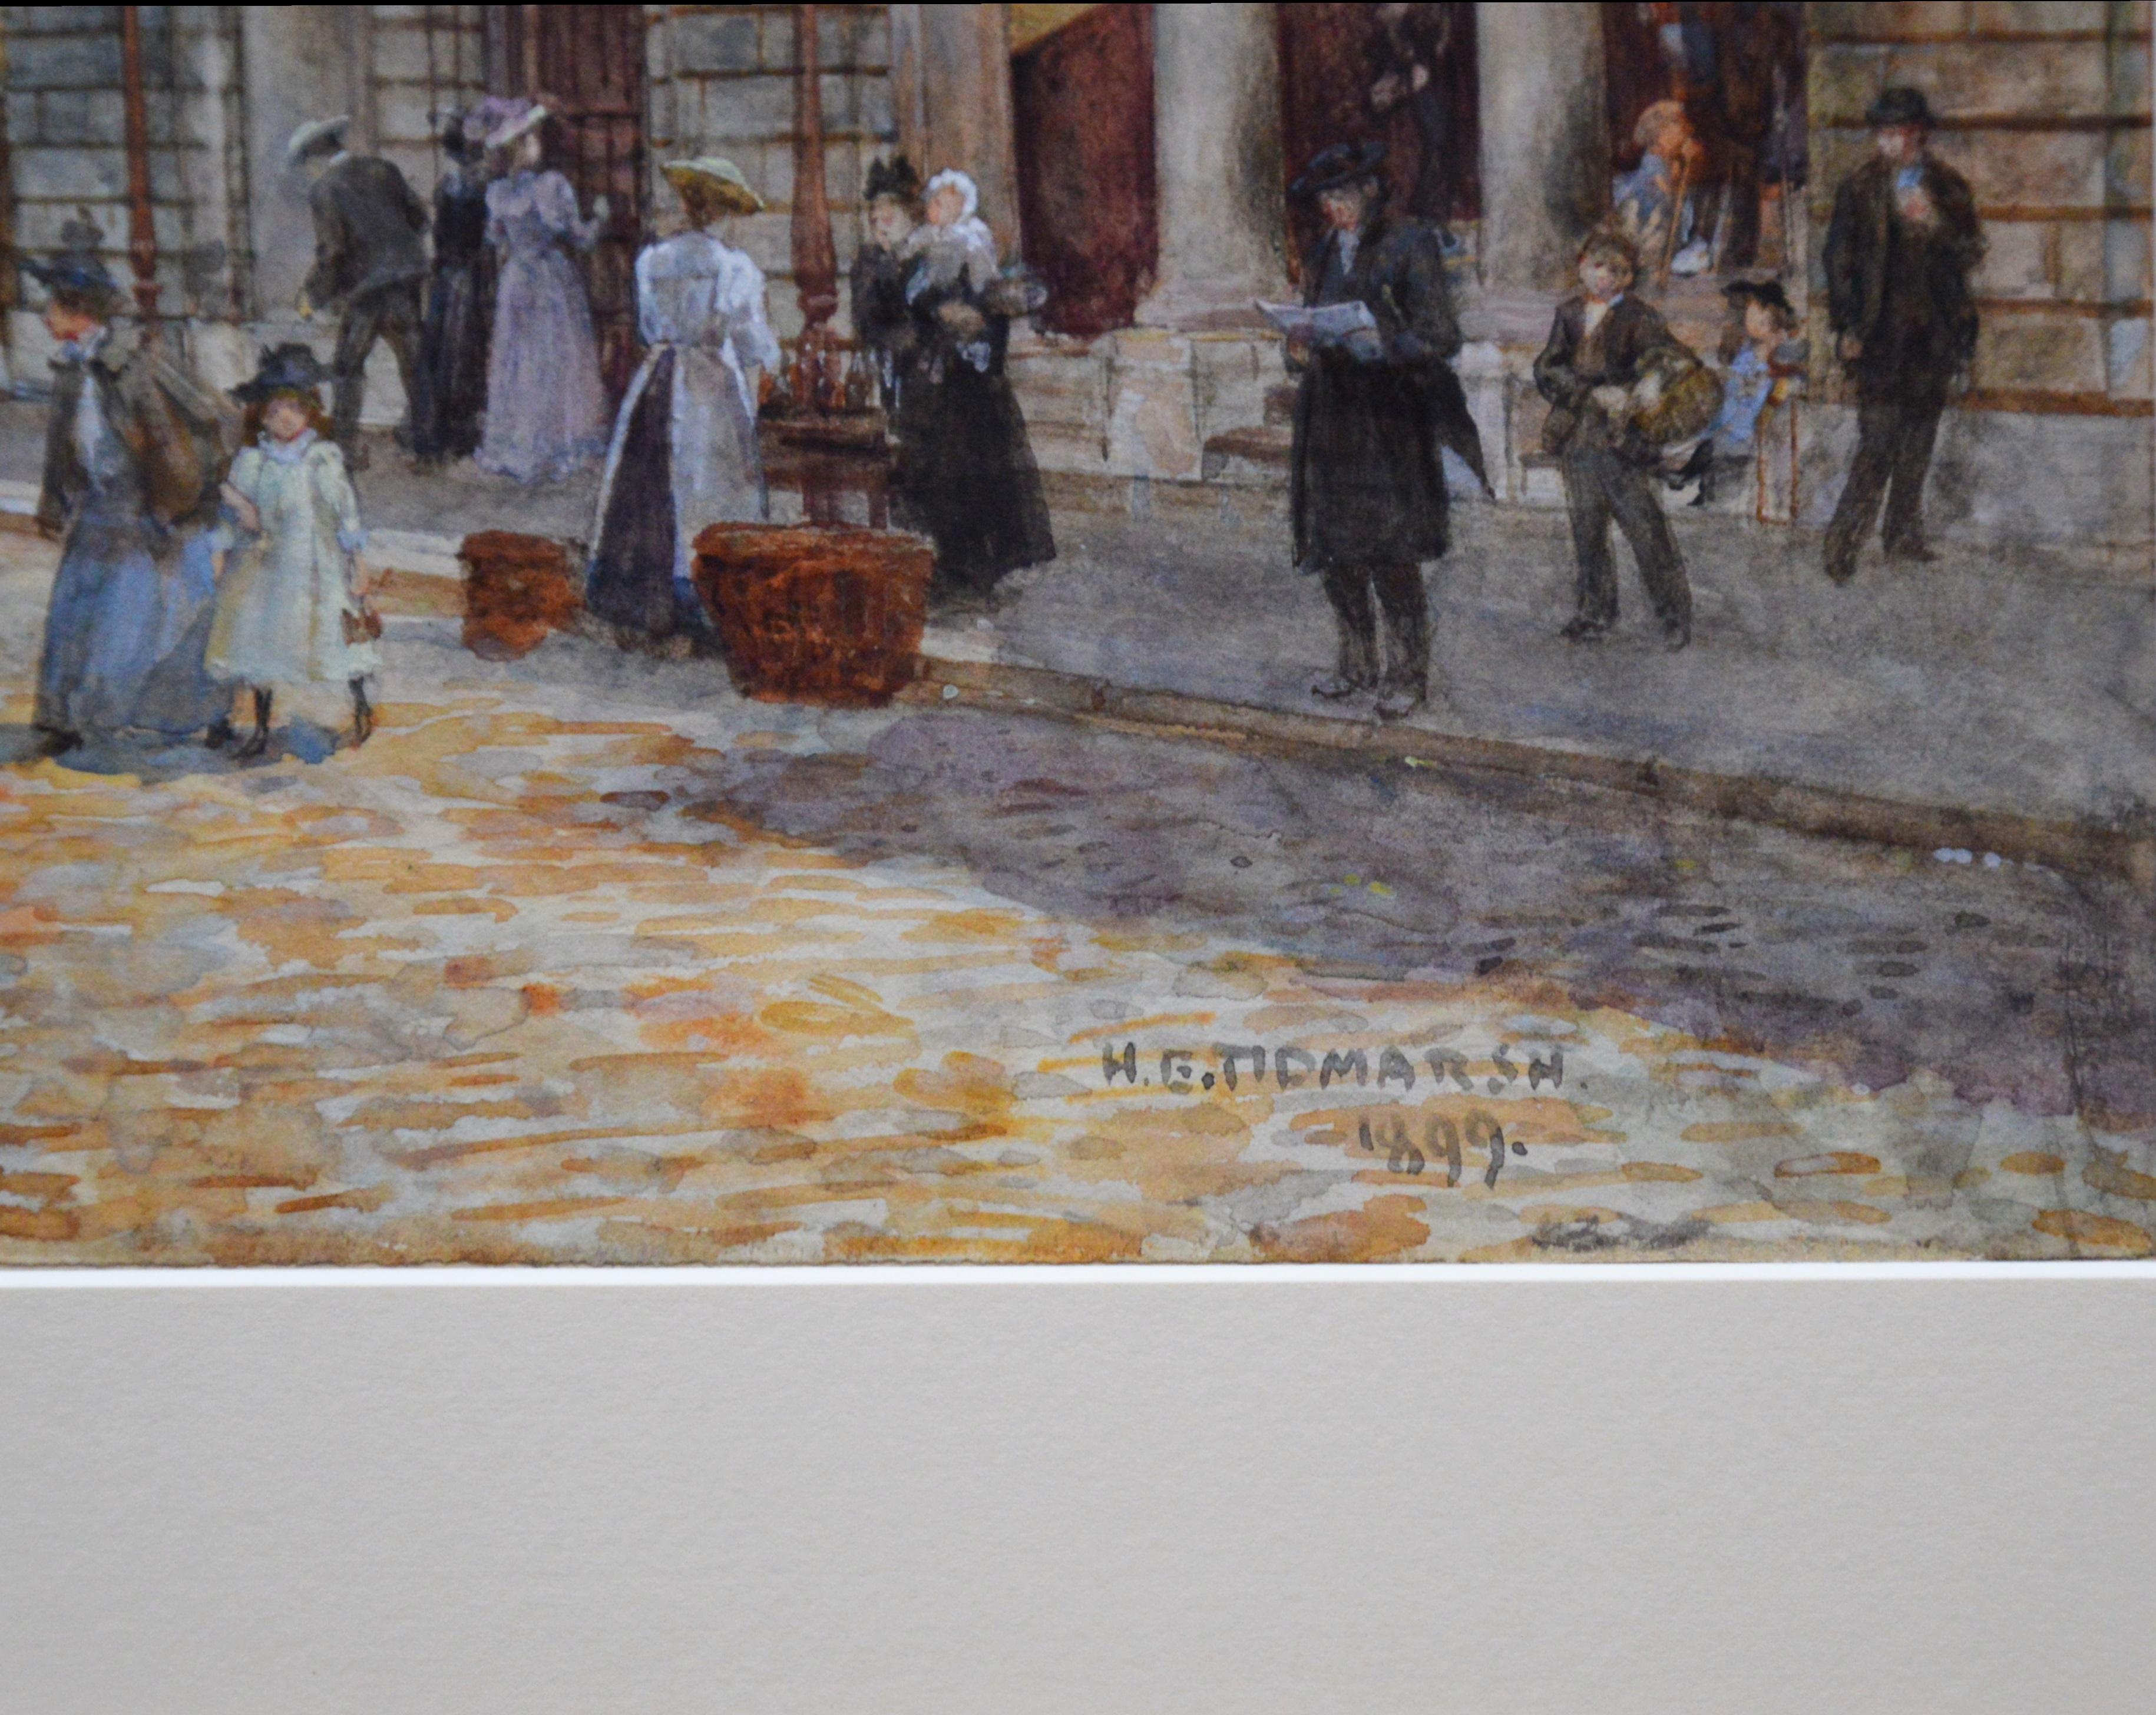 ‘St Bartholomew’s, Smithfield 1899’ by Henry Edward Tidmarsh (1855-1939).

This work has just been professionally conserved with acid-free mount, re-glazed behind Museum Glass and re-hung in a superb quality bespoke gold metal leaf frame. Clients